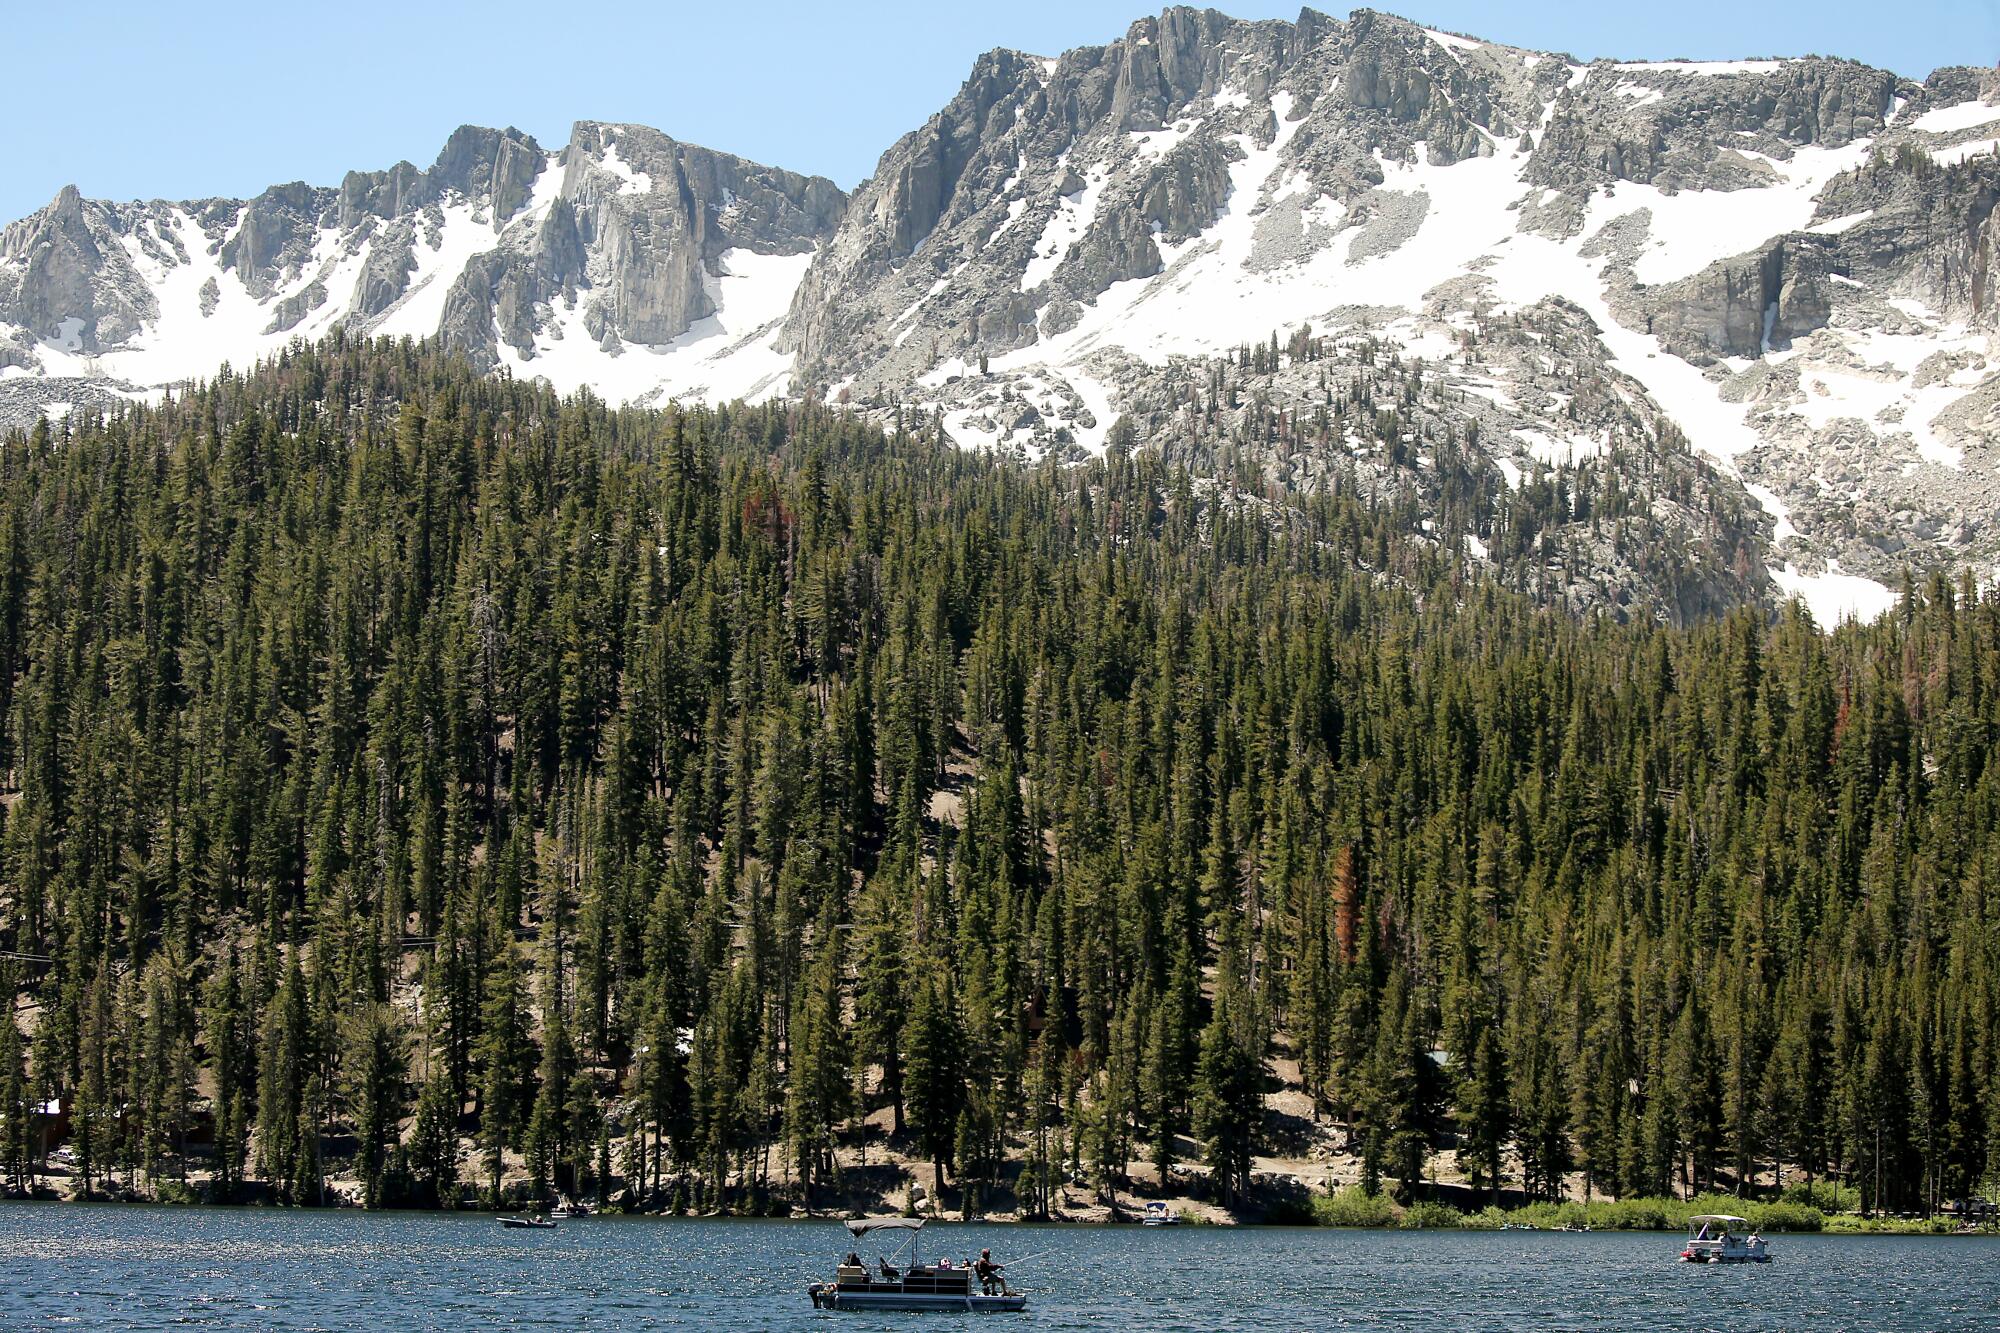 The summer melt is underway in Mammoth Lakes following a year of record snowfall in the Sierra Nevada.